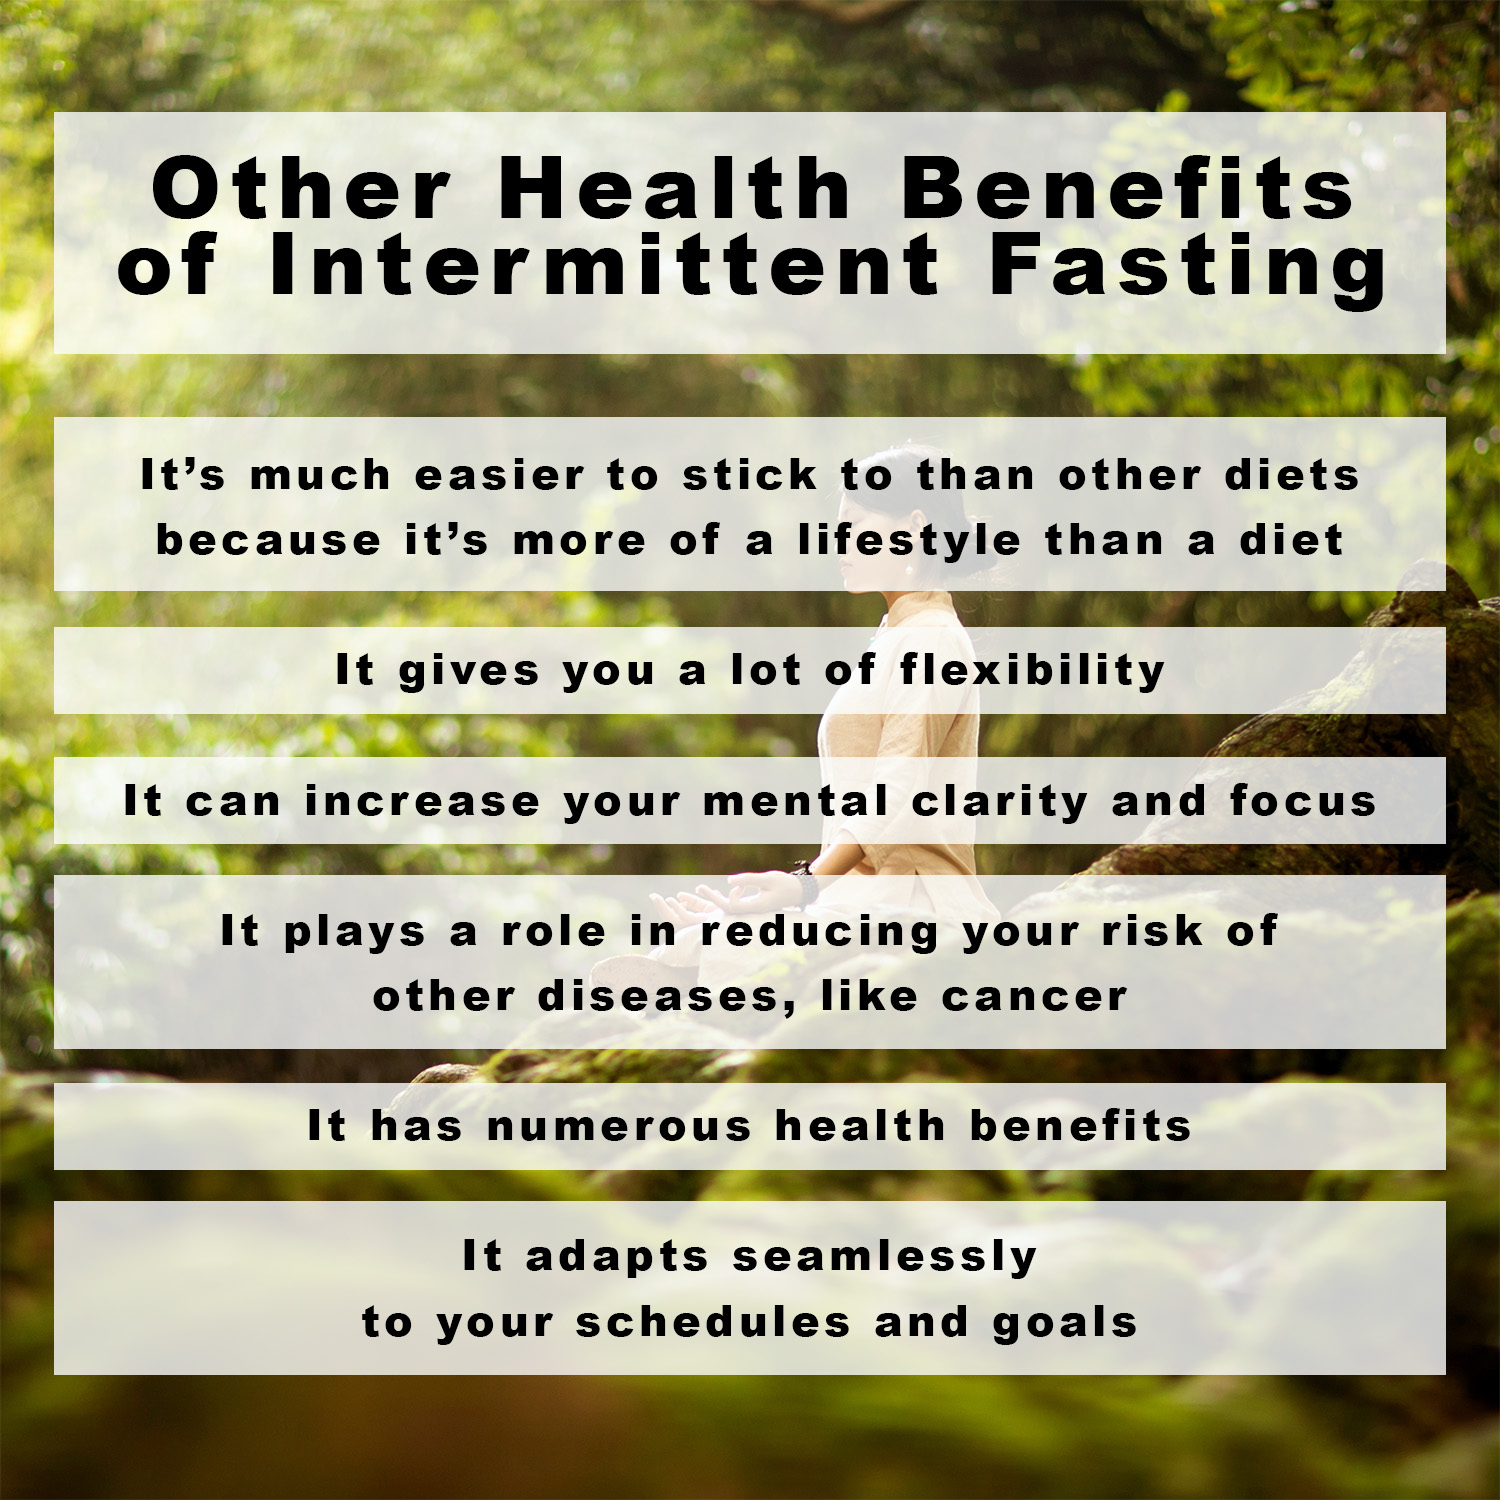 Tips for Cheat Days Intermittent Fasting